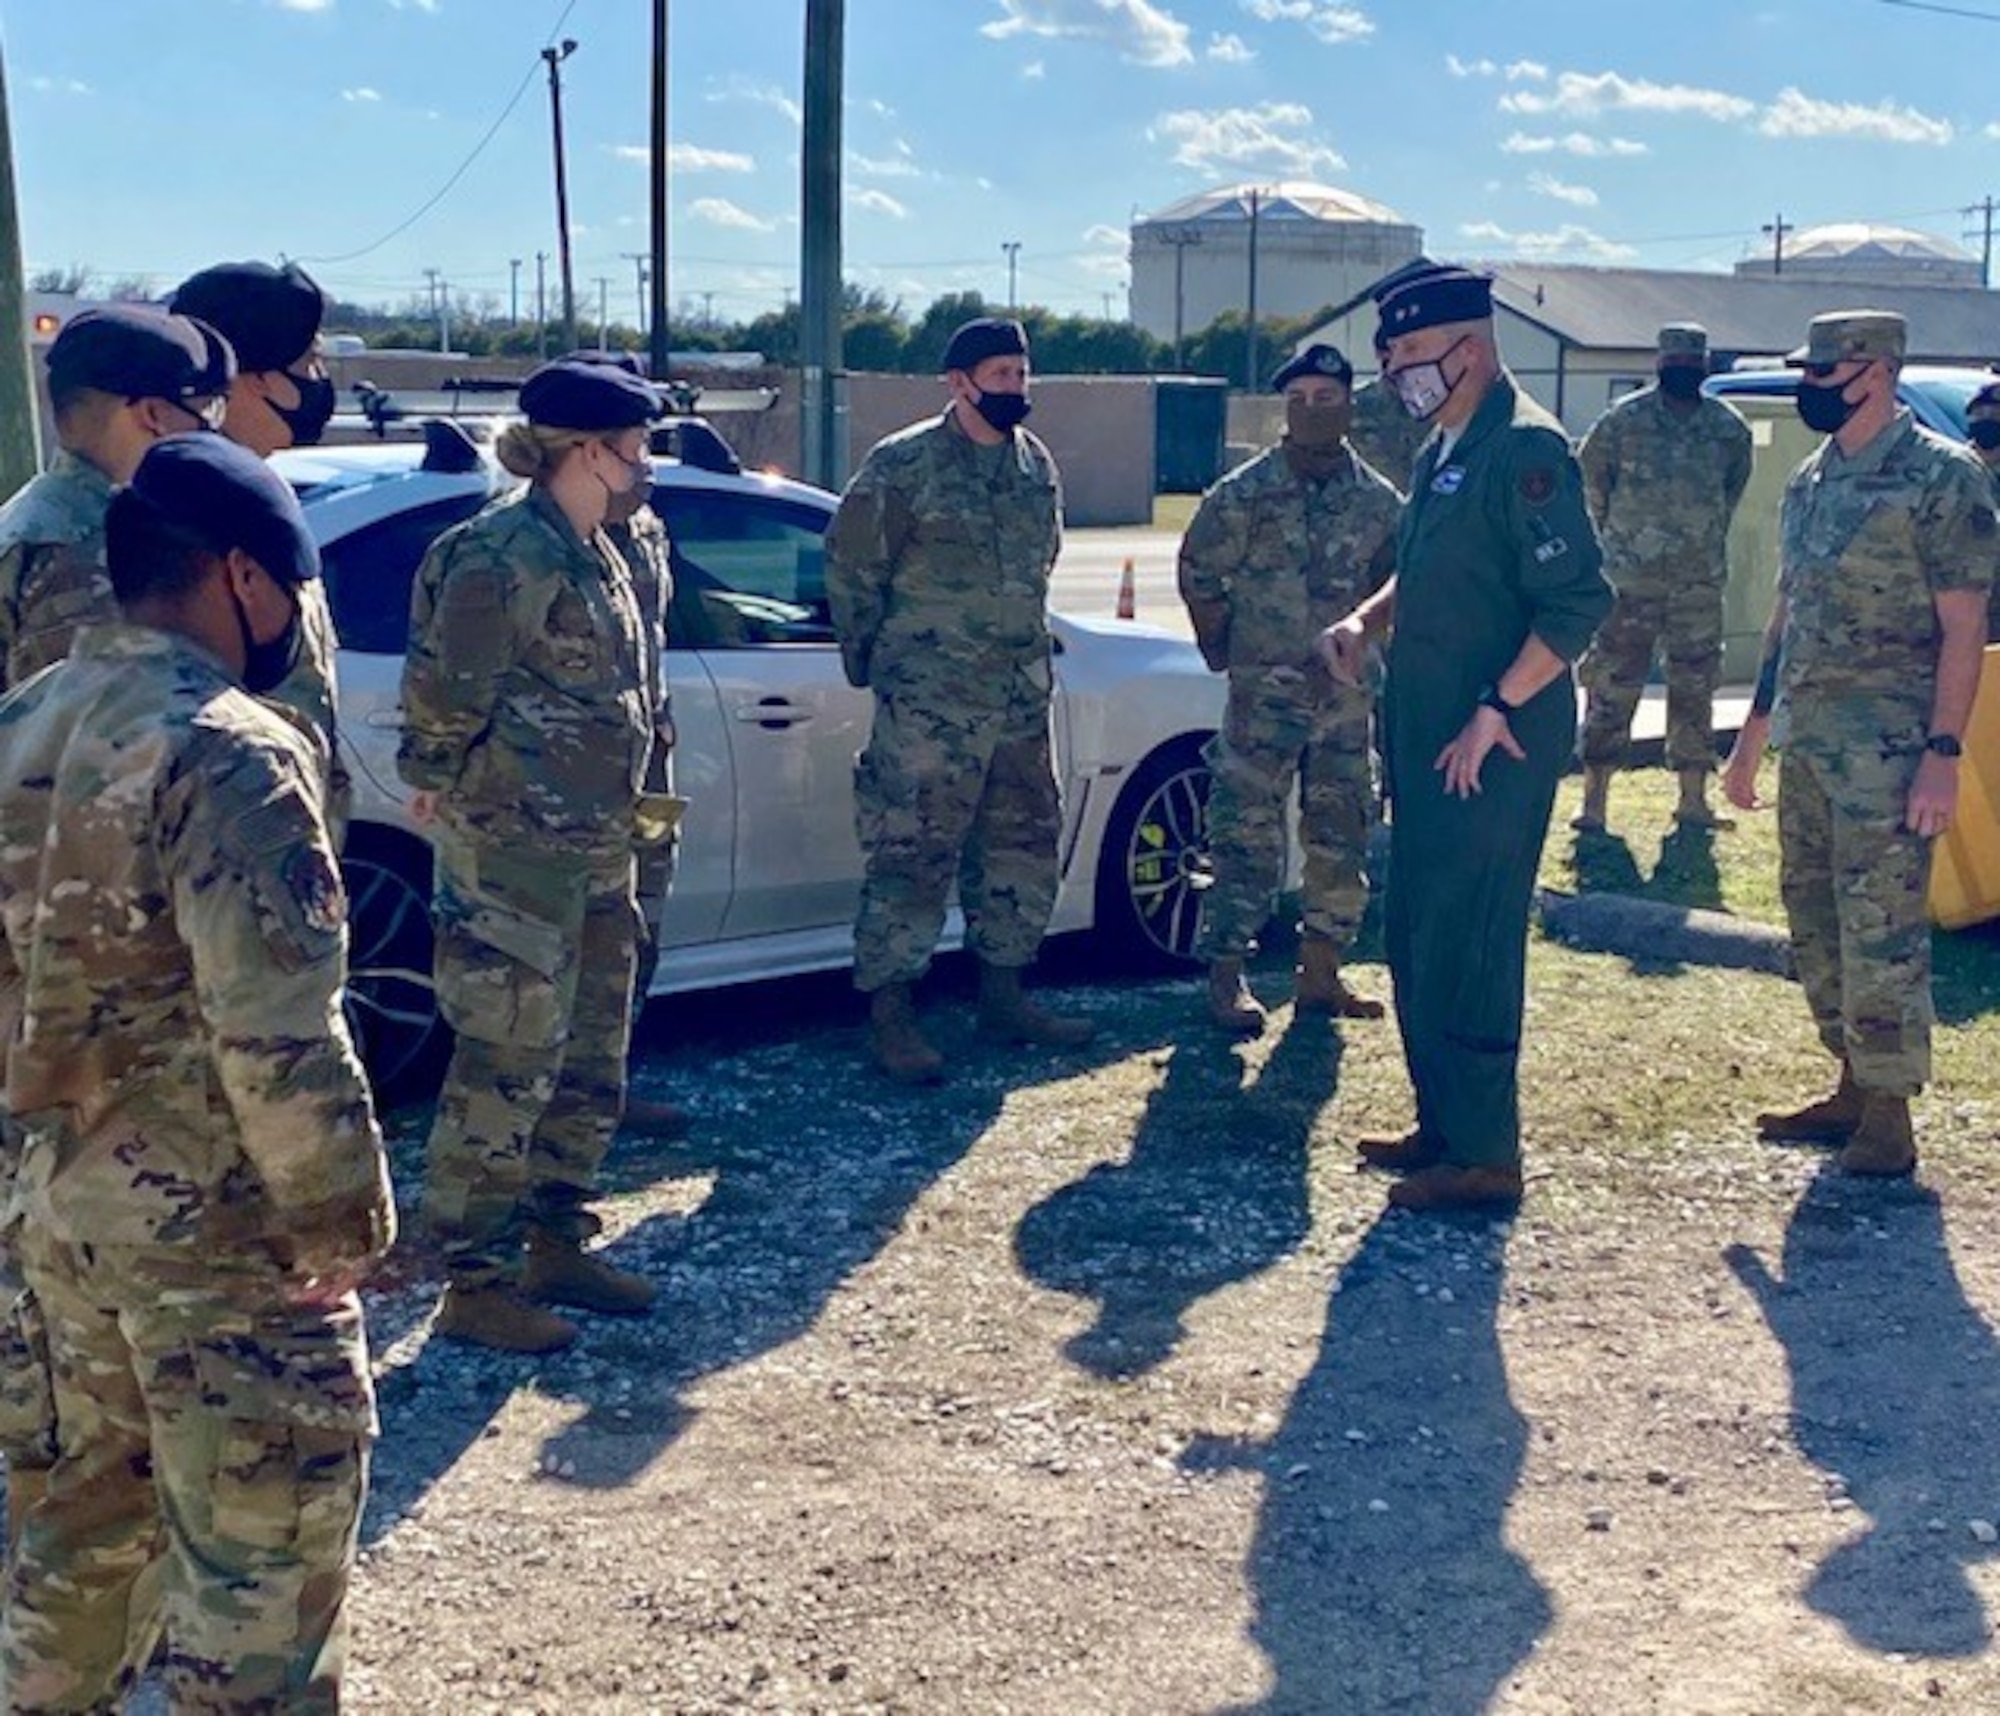 Maj. Gen. Brian Borgen, 10th Air Force commander, speaks to members of the 301st Fighter Wing Security Forces Squadron during a visit to the wing on Feb. 6, 2021, at Naval Air Station Joint Reserve Base Fort Worth, Texas.